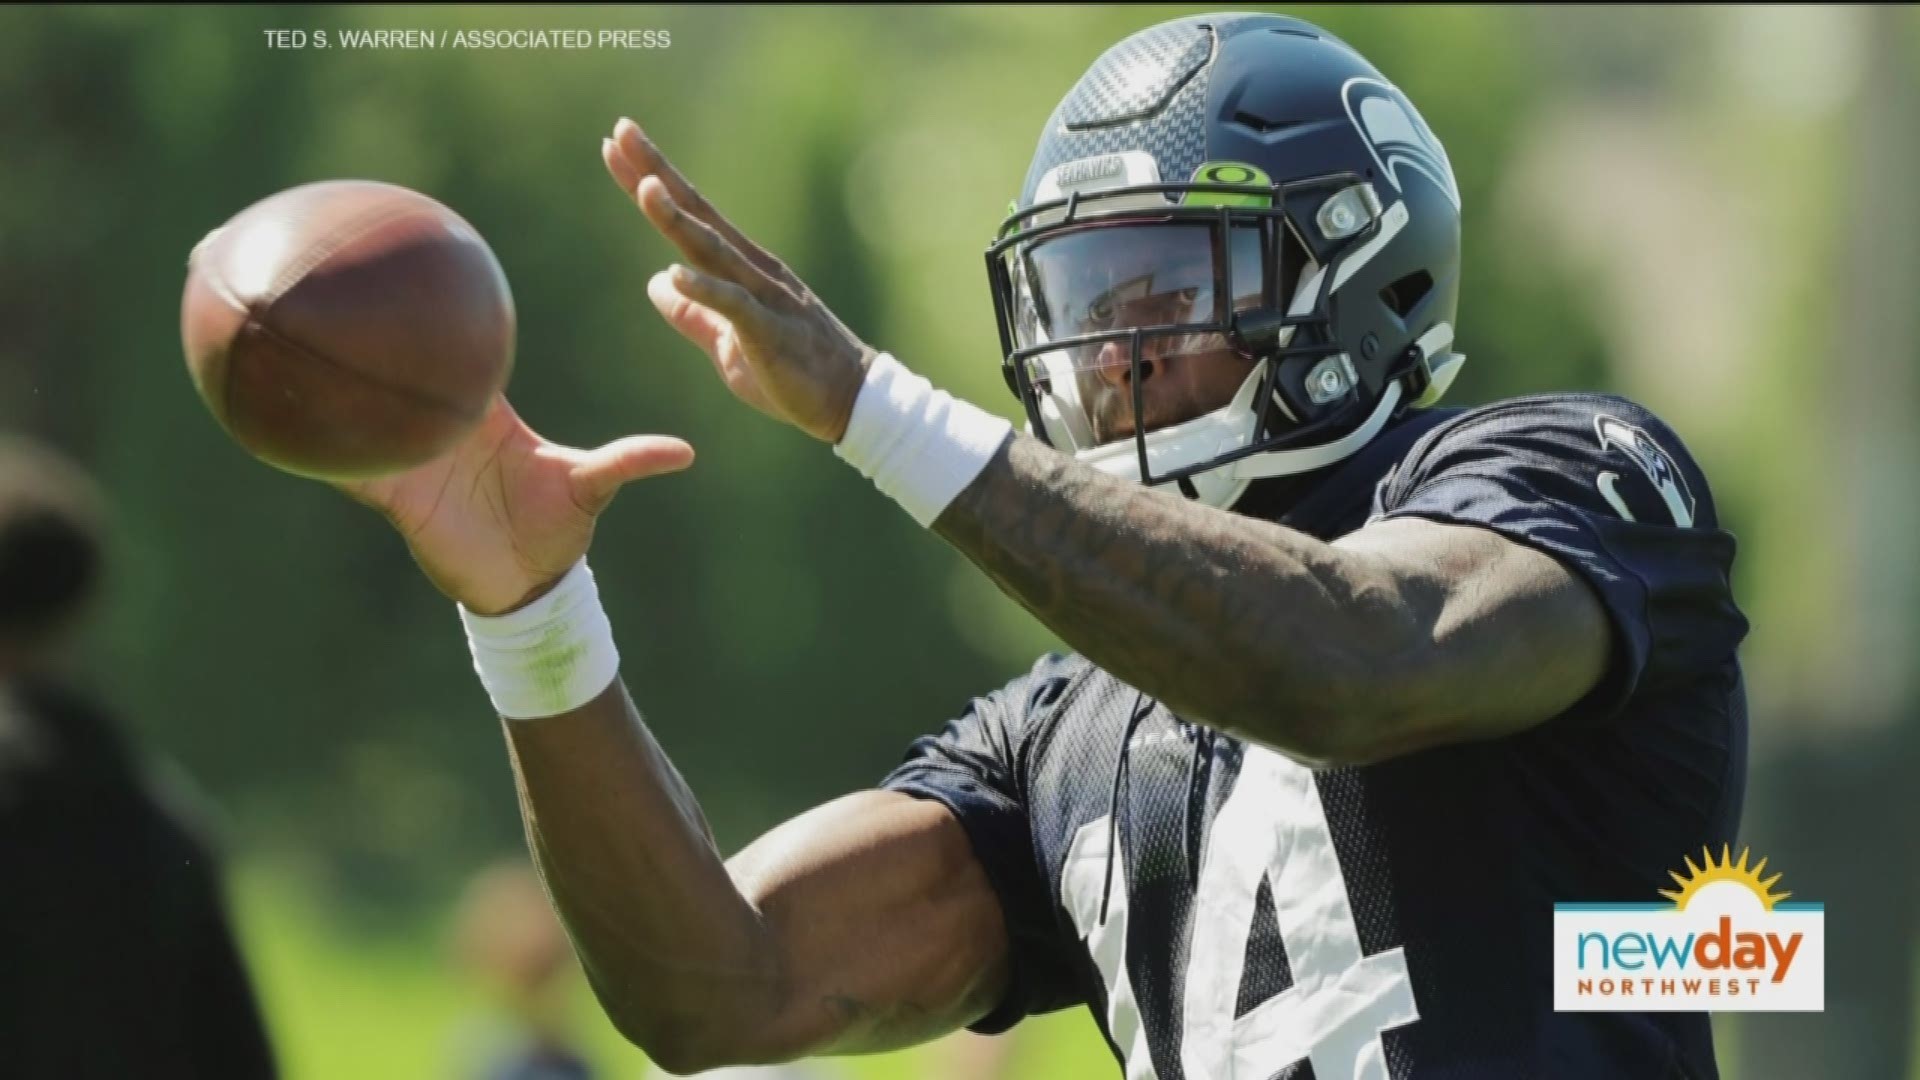 The Seahawks' first pre-season game is quickly approaching and Terry Hollimon has the word on the players to watch.